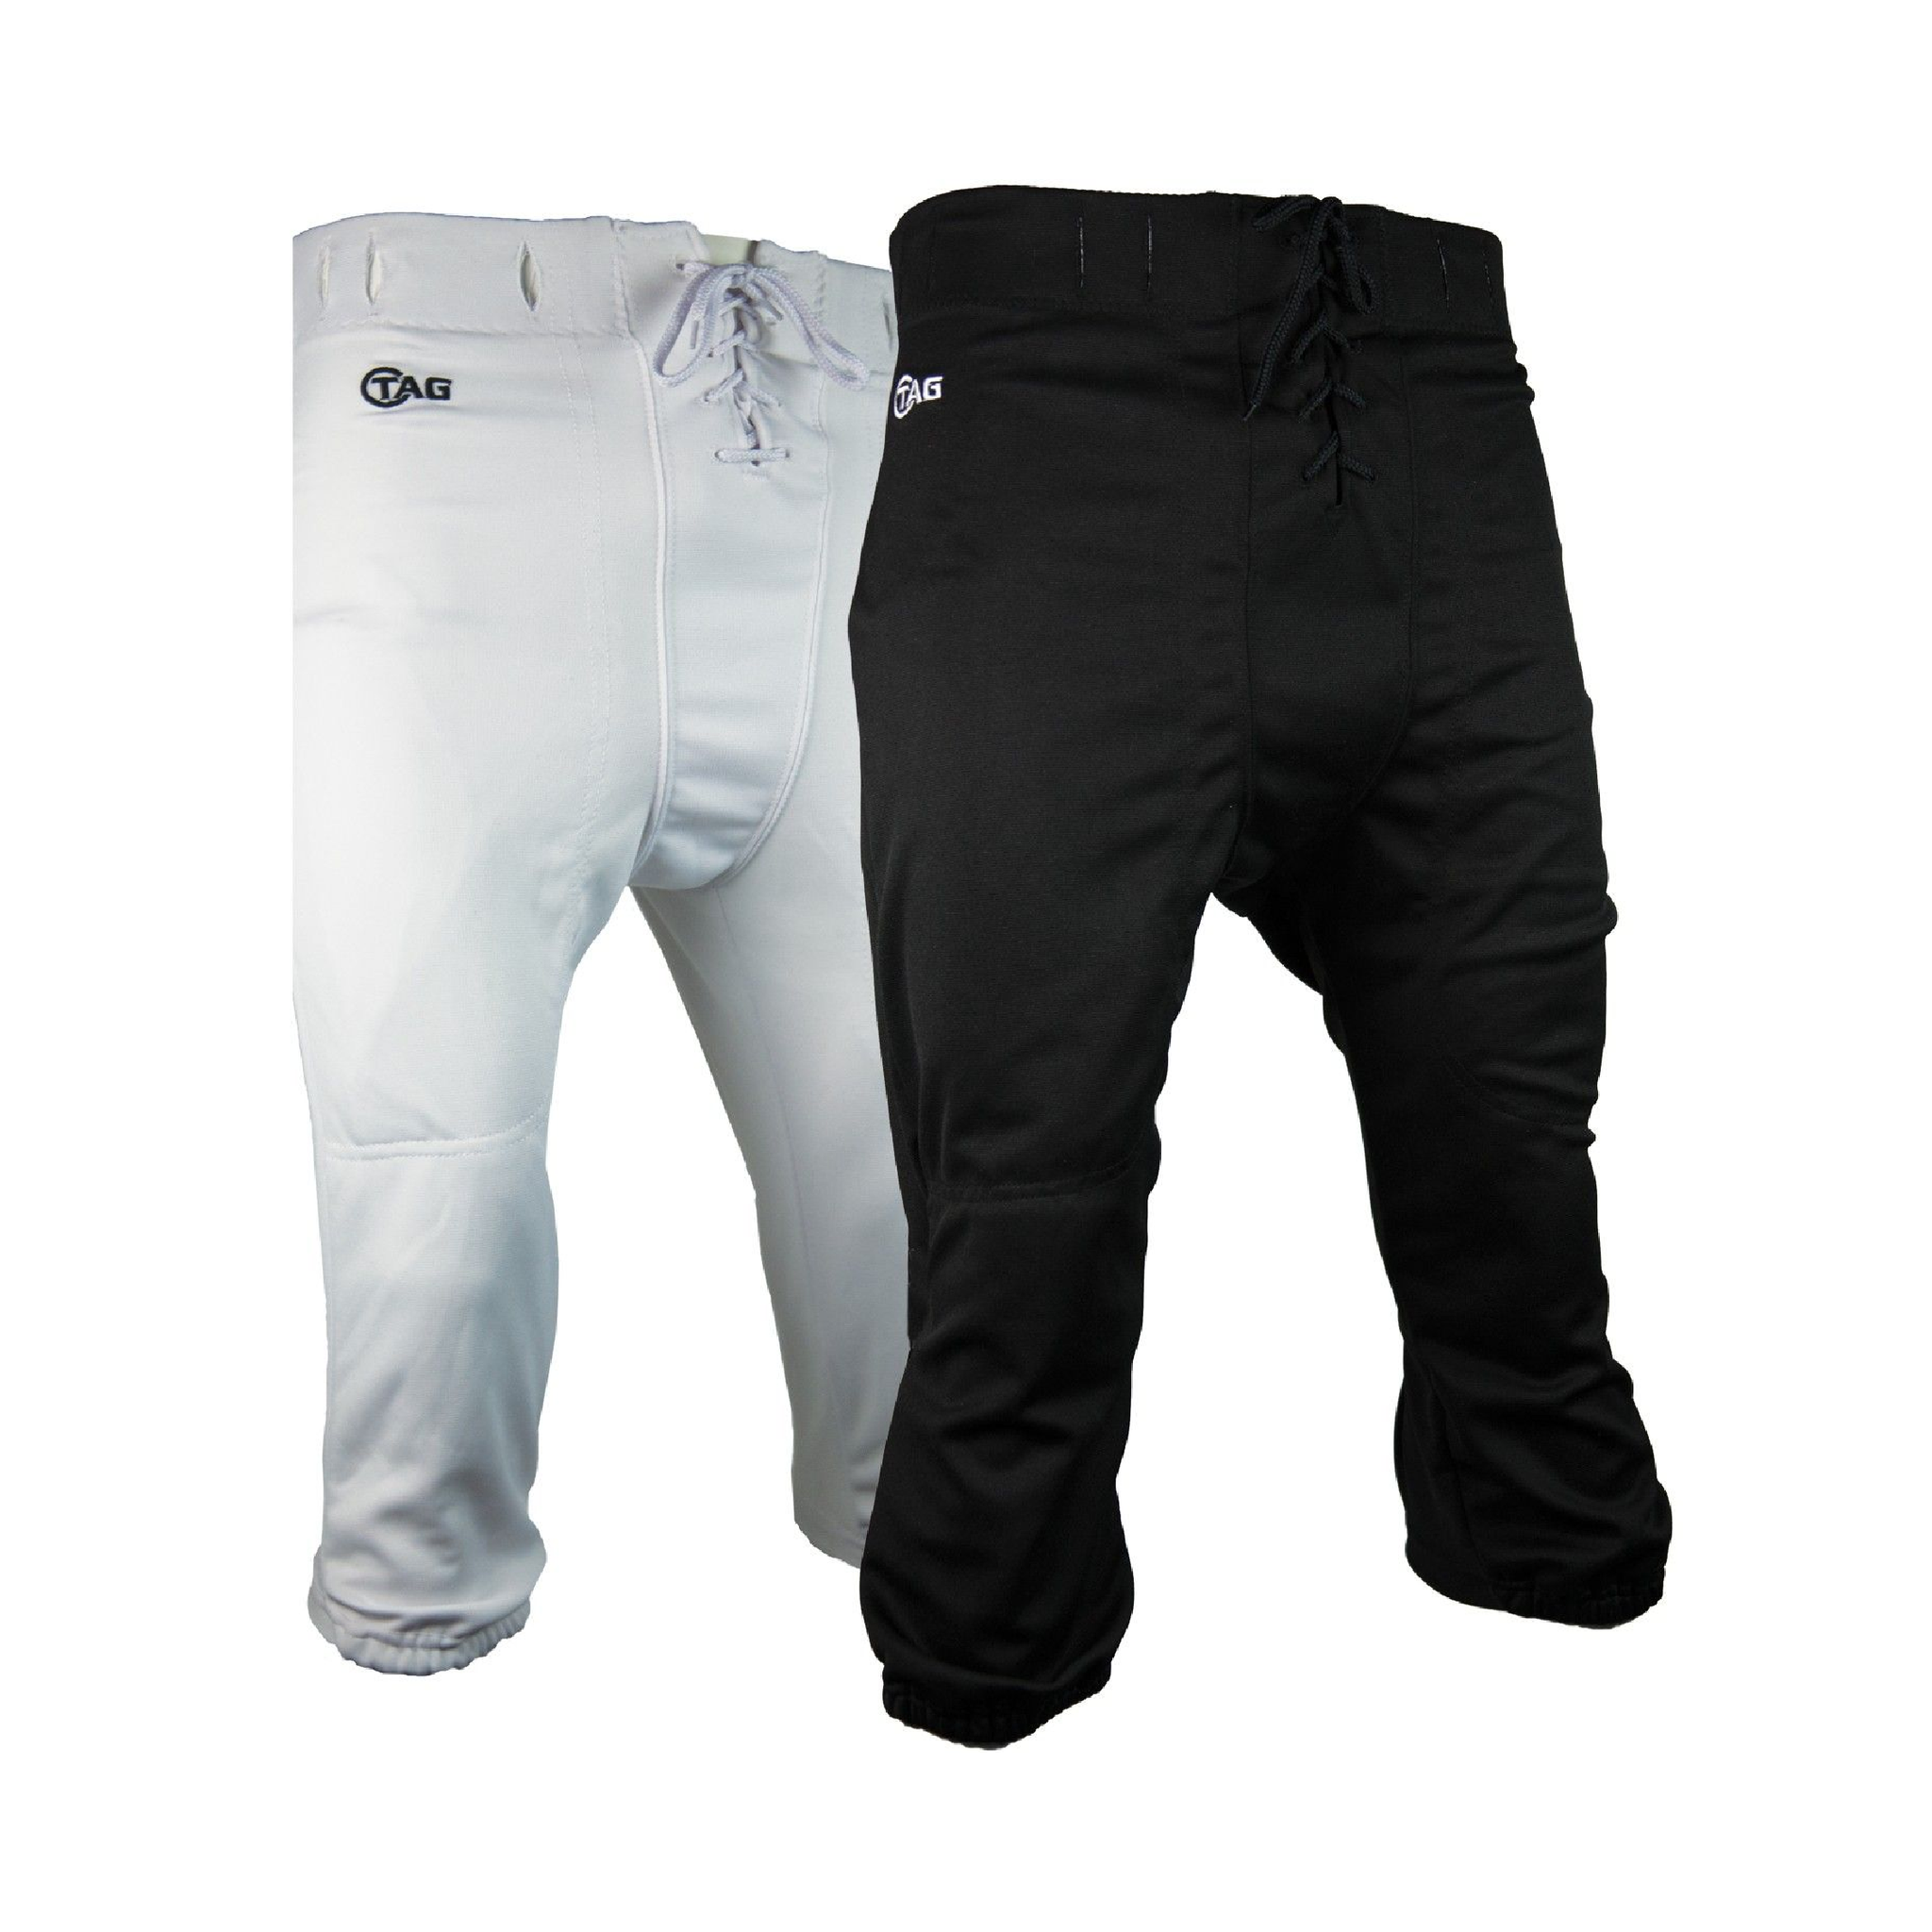 TAG Adult Slotted Football Practice Pant